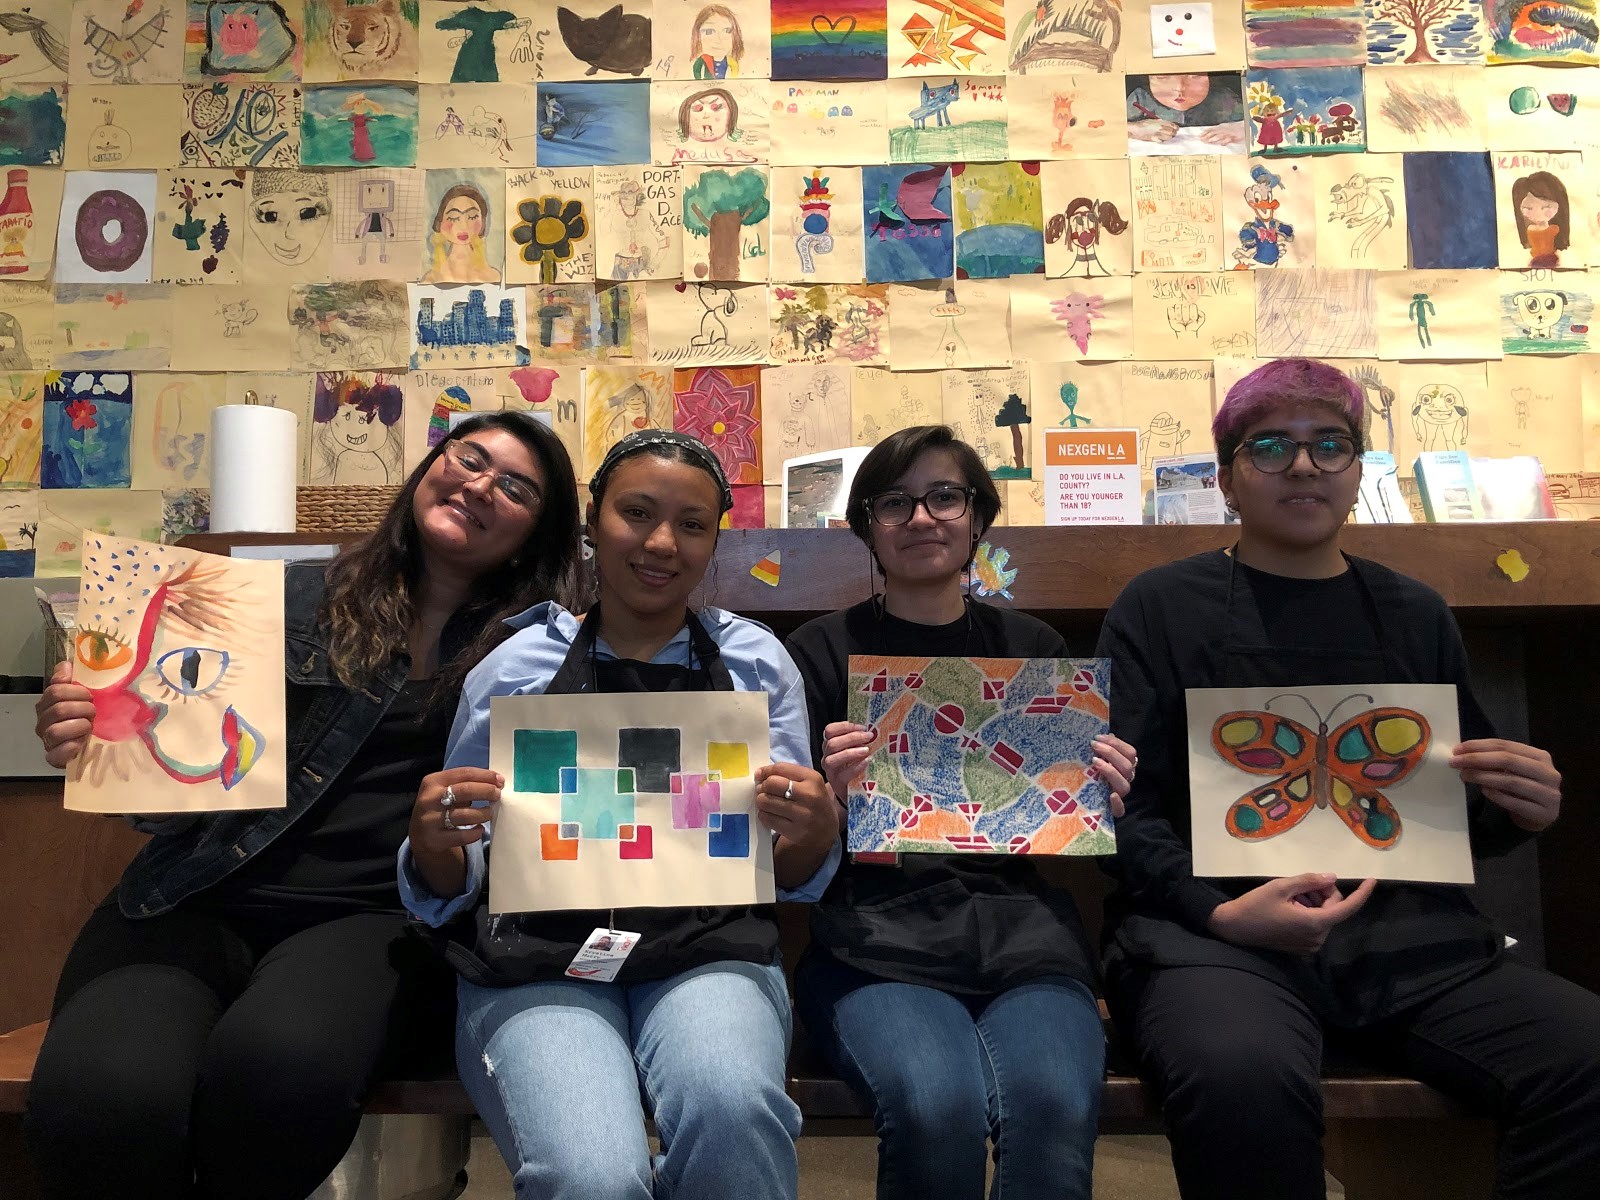 Look for these familiar faces at the pop-ups in the art galleries! (From left: Julia Velasquez, Krys Murry, Susi Castillo, and Ceci Flores)